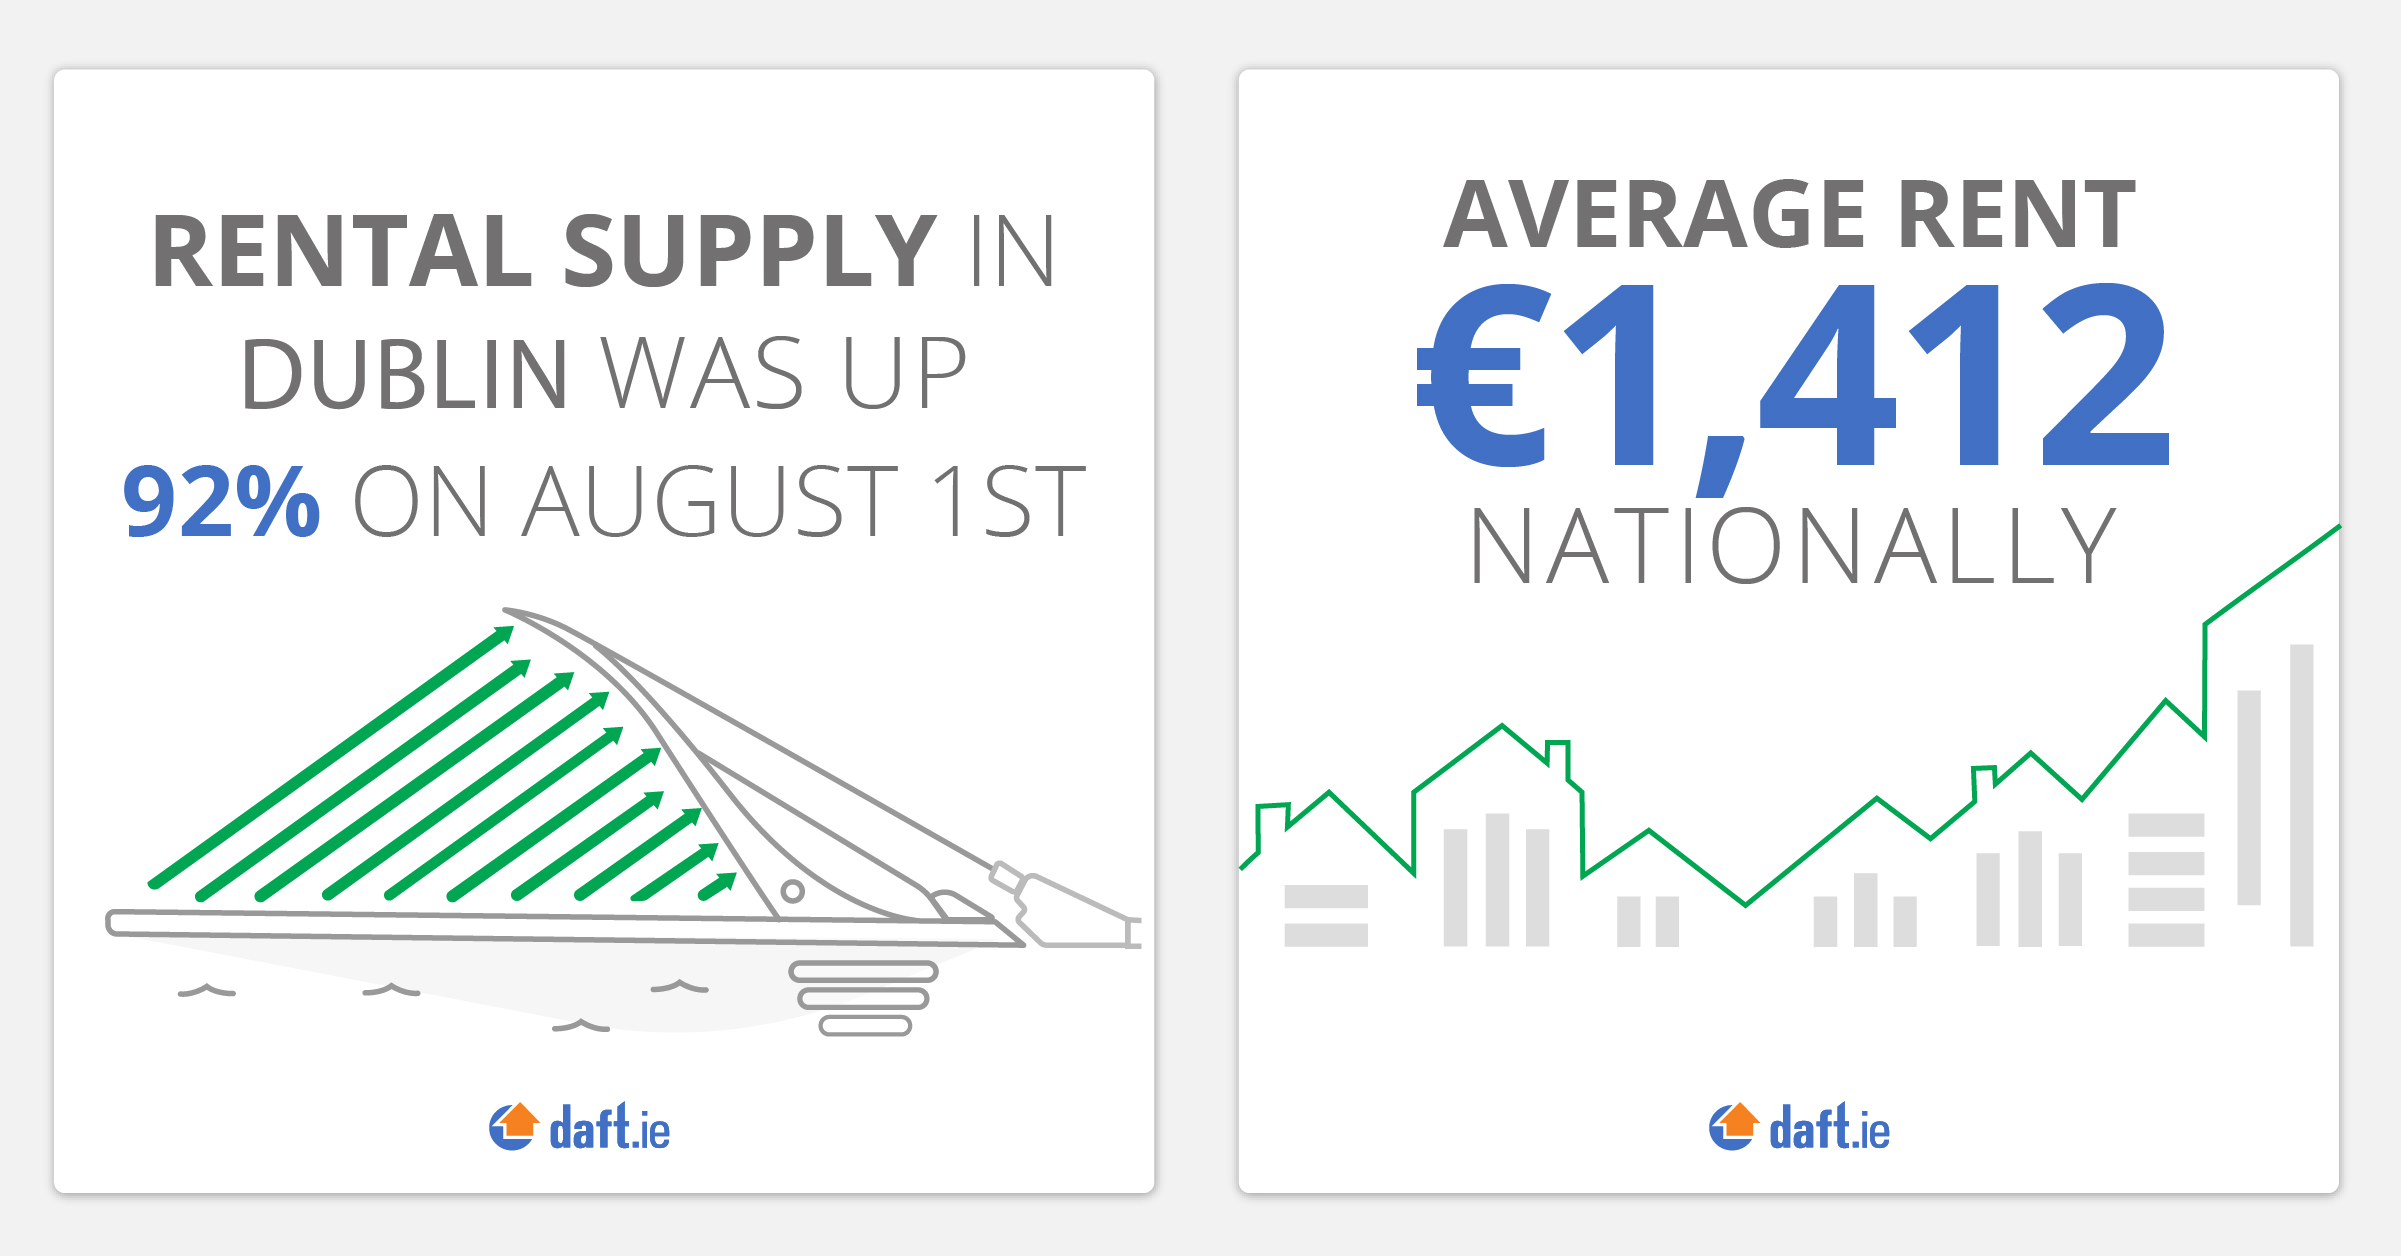 Rental supply in Dublin and average rent nationally